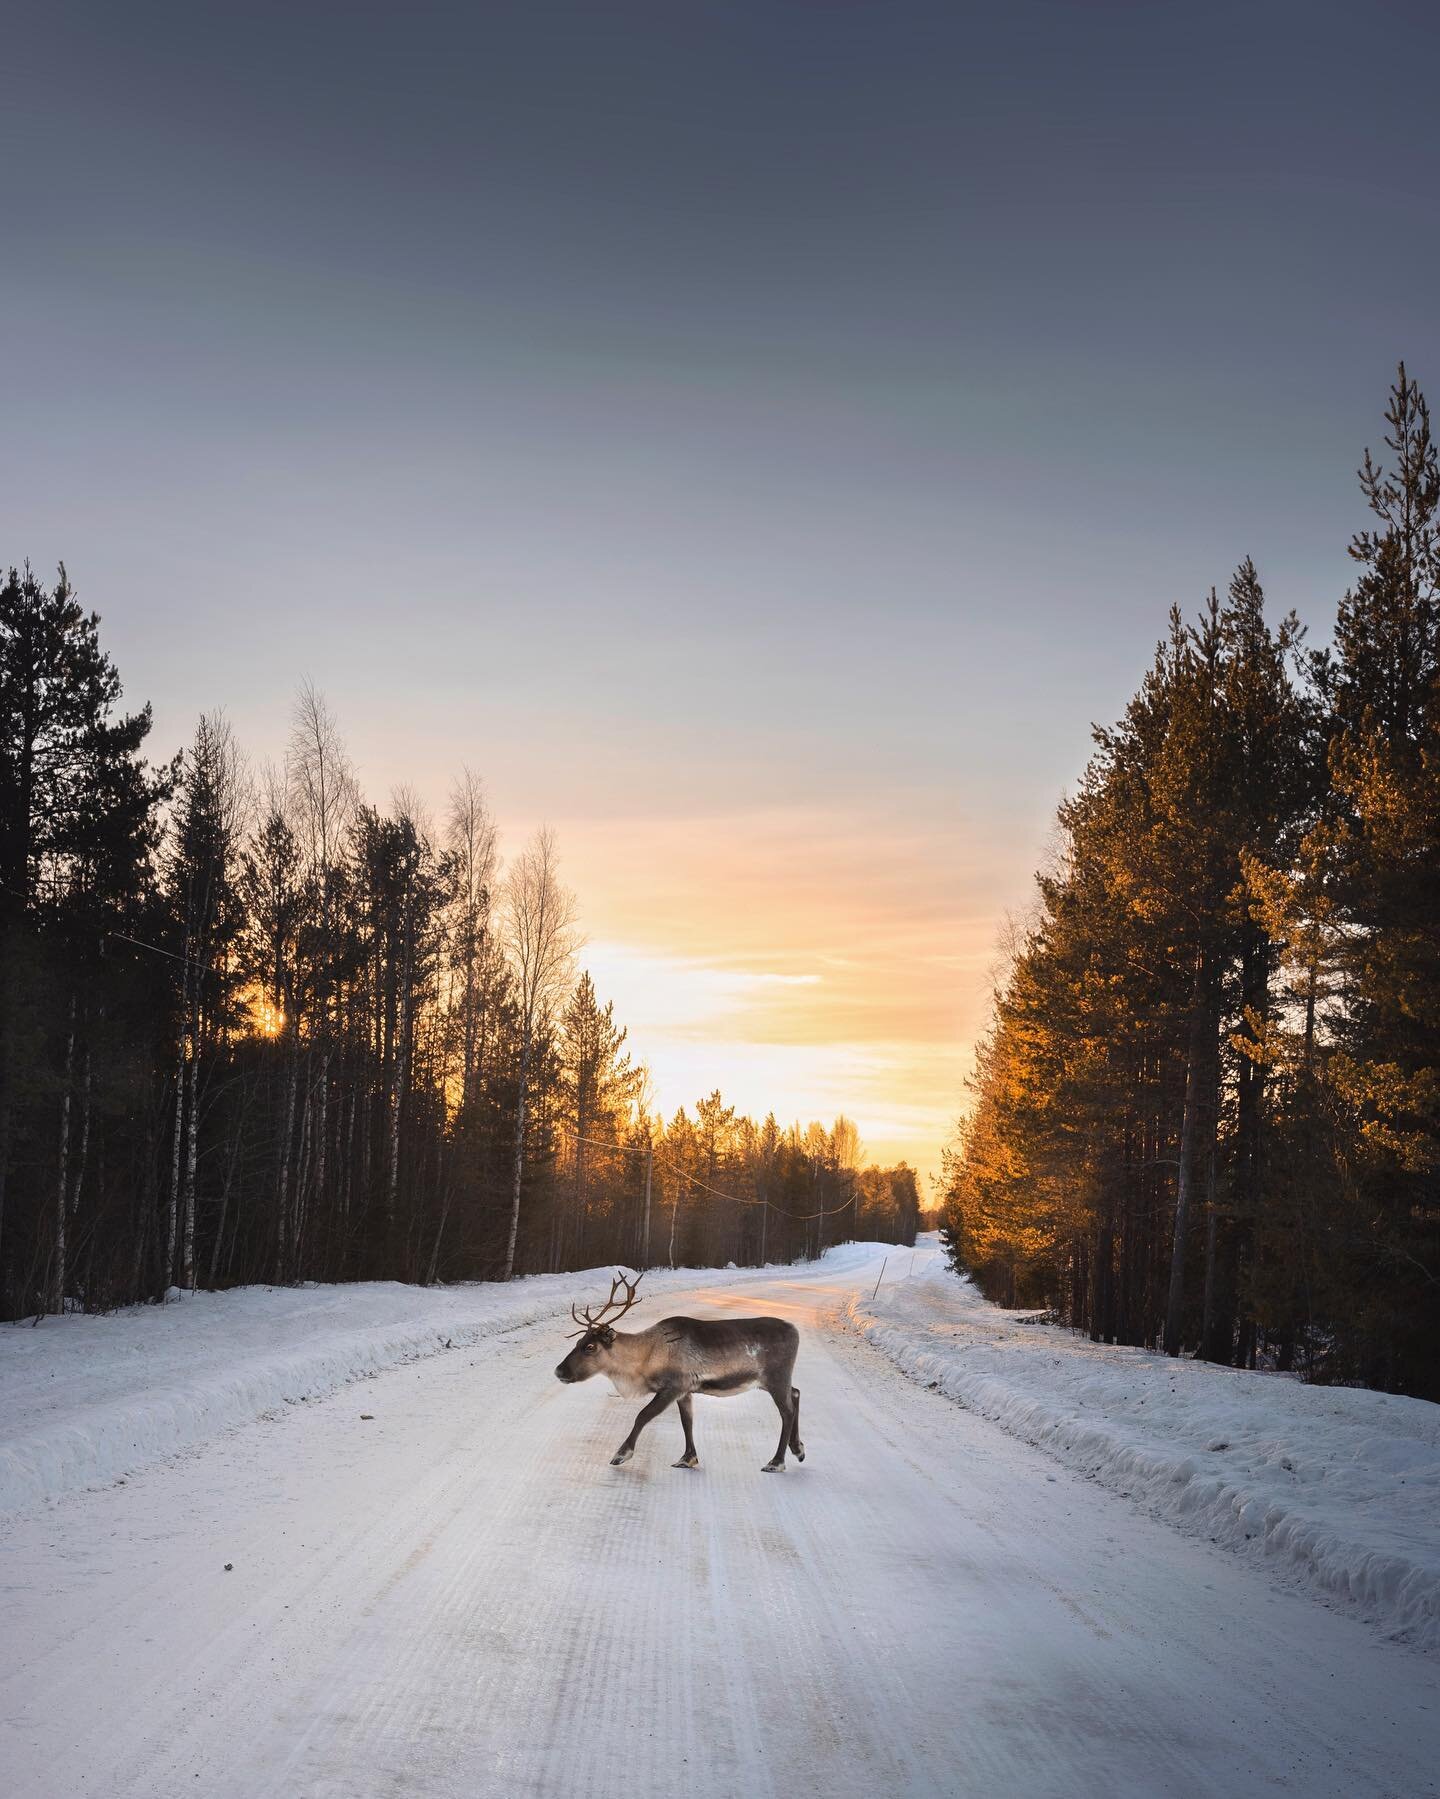 In the past few days, I have come to realize that all the cliches about Lapland are true.💛💙 The region is breathtakingly beautiful, and is home to some extraordinary unspoiled landscapes. It is truly an amazing destination to explore. Expect to see